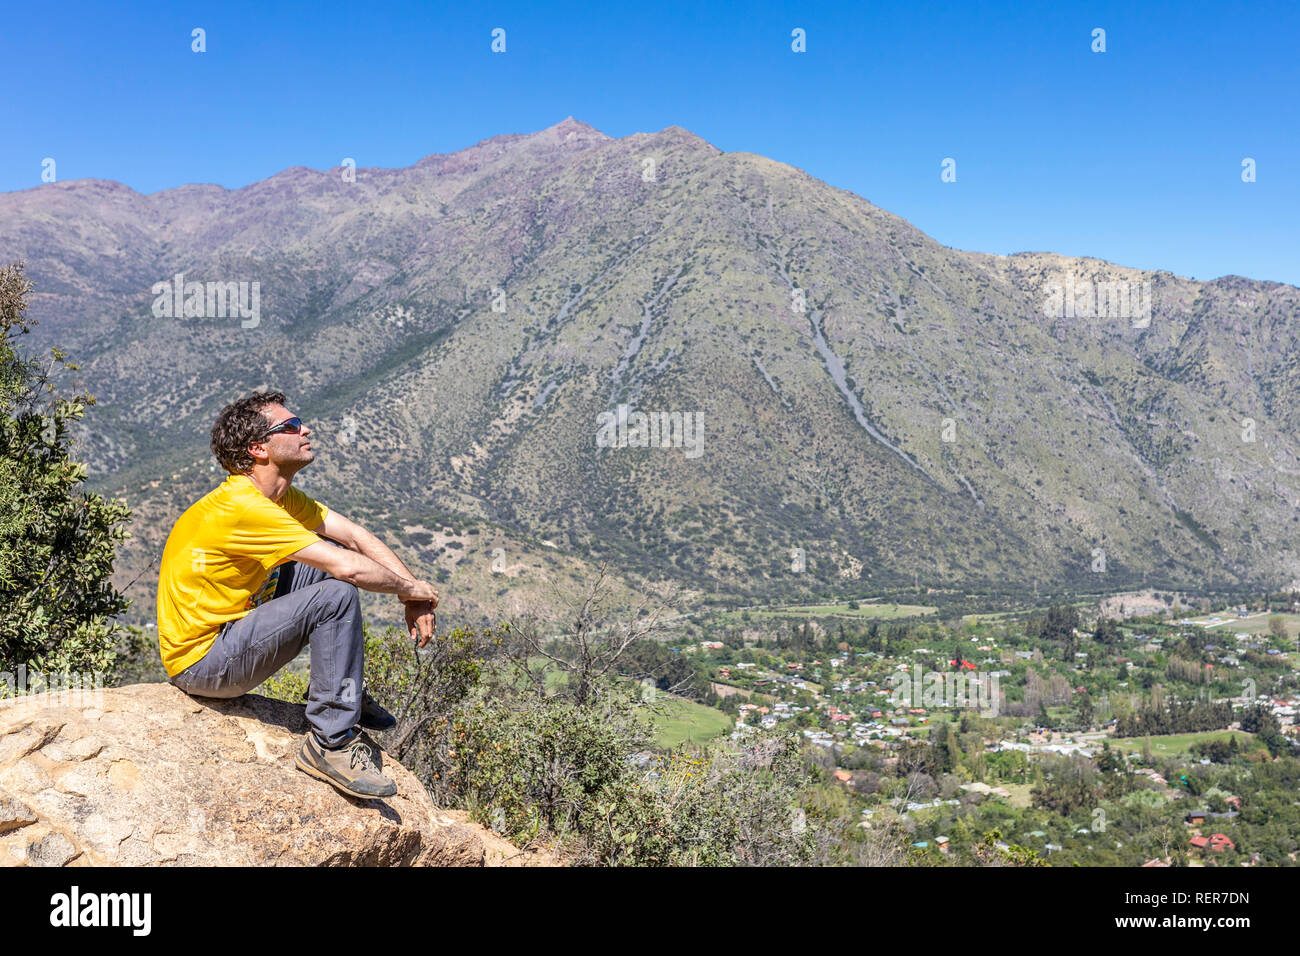 One man hiker with sunglasses looking at landscape views inside a valley at Andes mountains. An amazing rugged scenery on a sunny day Stock Photo